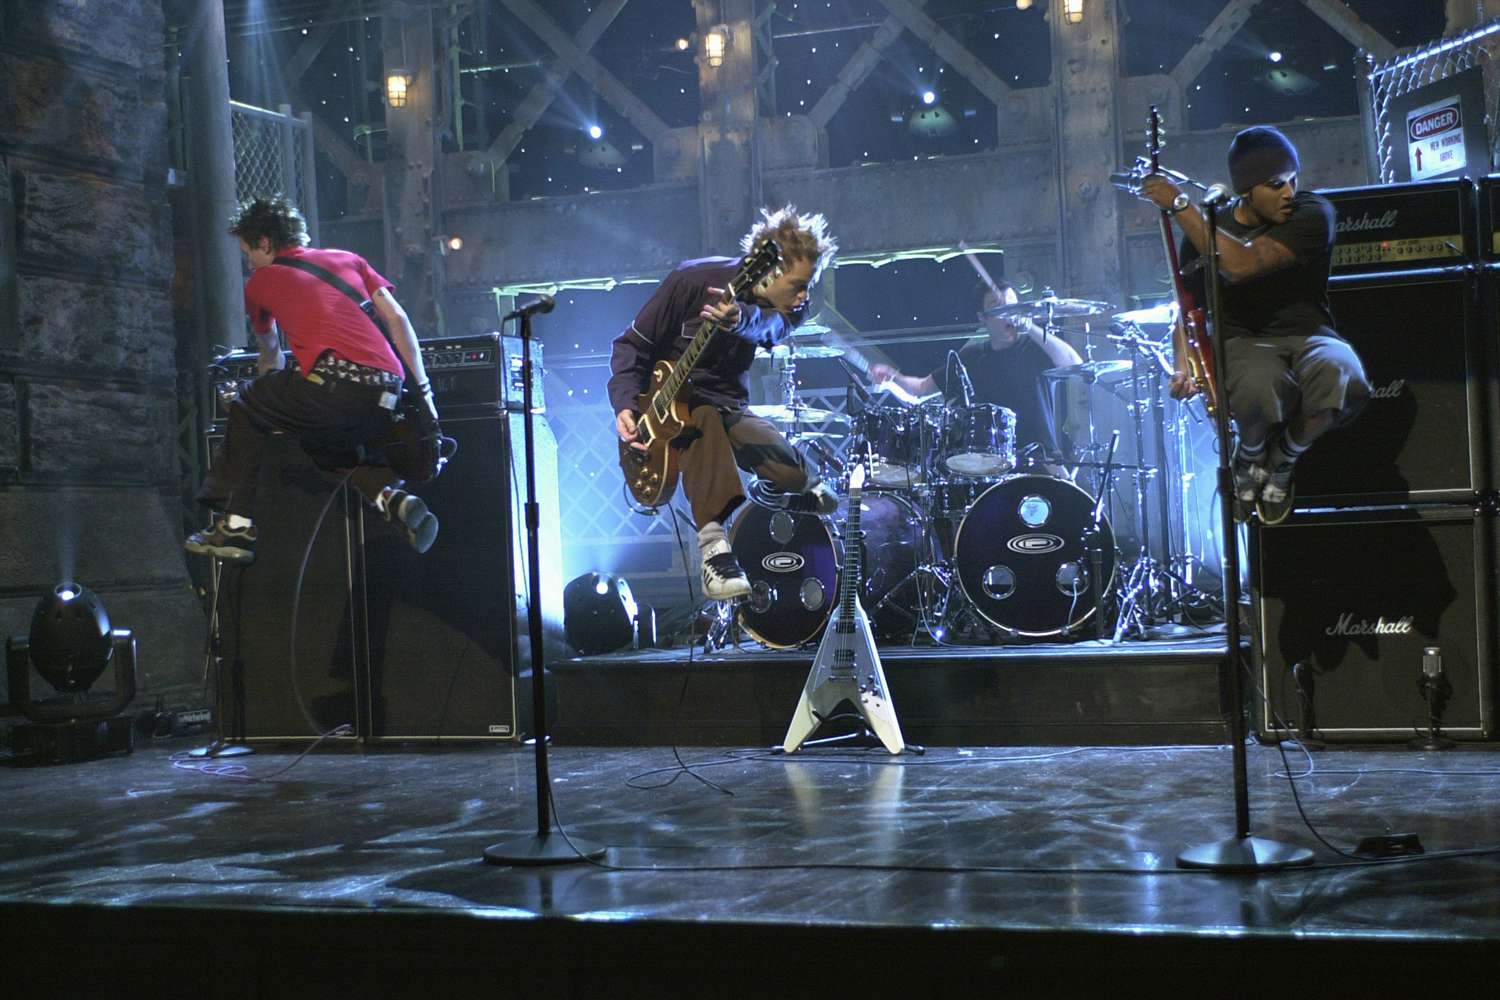 SATURDAY NIGHT LIVE -- Episode 2 -- Air Date 10/06/2001 -- Pictured: (l-r) Cone McCaslin, Deryck Whibley, Steve Jocz, Dave Baksh of musical guest Sum 41 performs the song "Fat Lip" on October 6, 2001